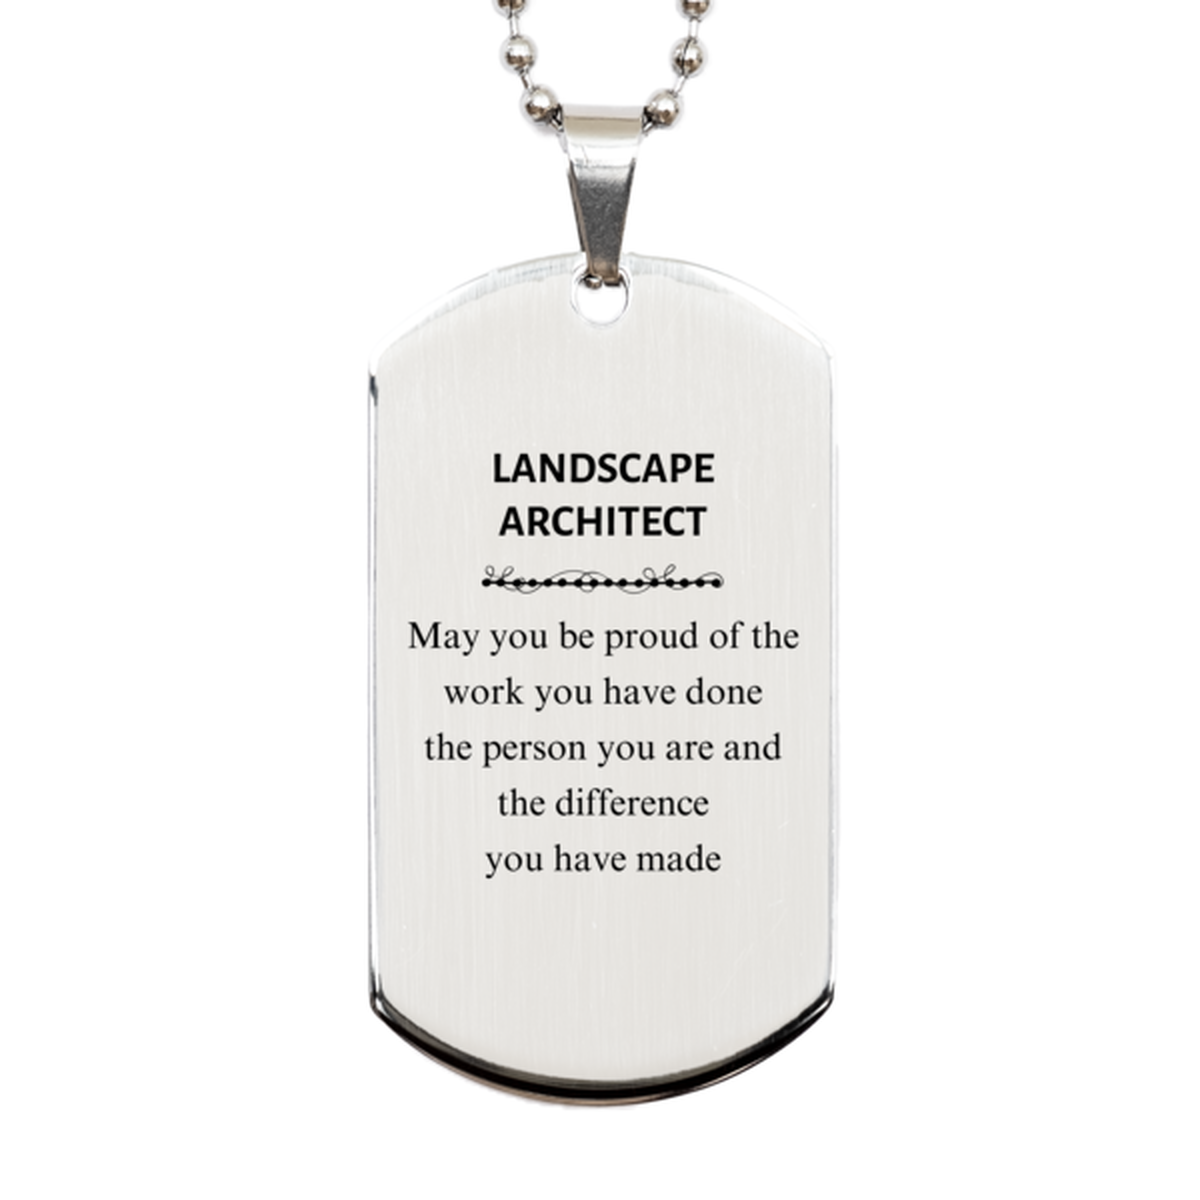 Landscape Architect May you be proud of the work you have done, Retirement Landscape Architect Silver Dog Tag for Colleague Appreciation Gifts Amazing for Landscape Architect